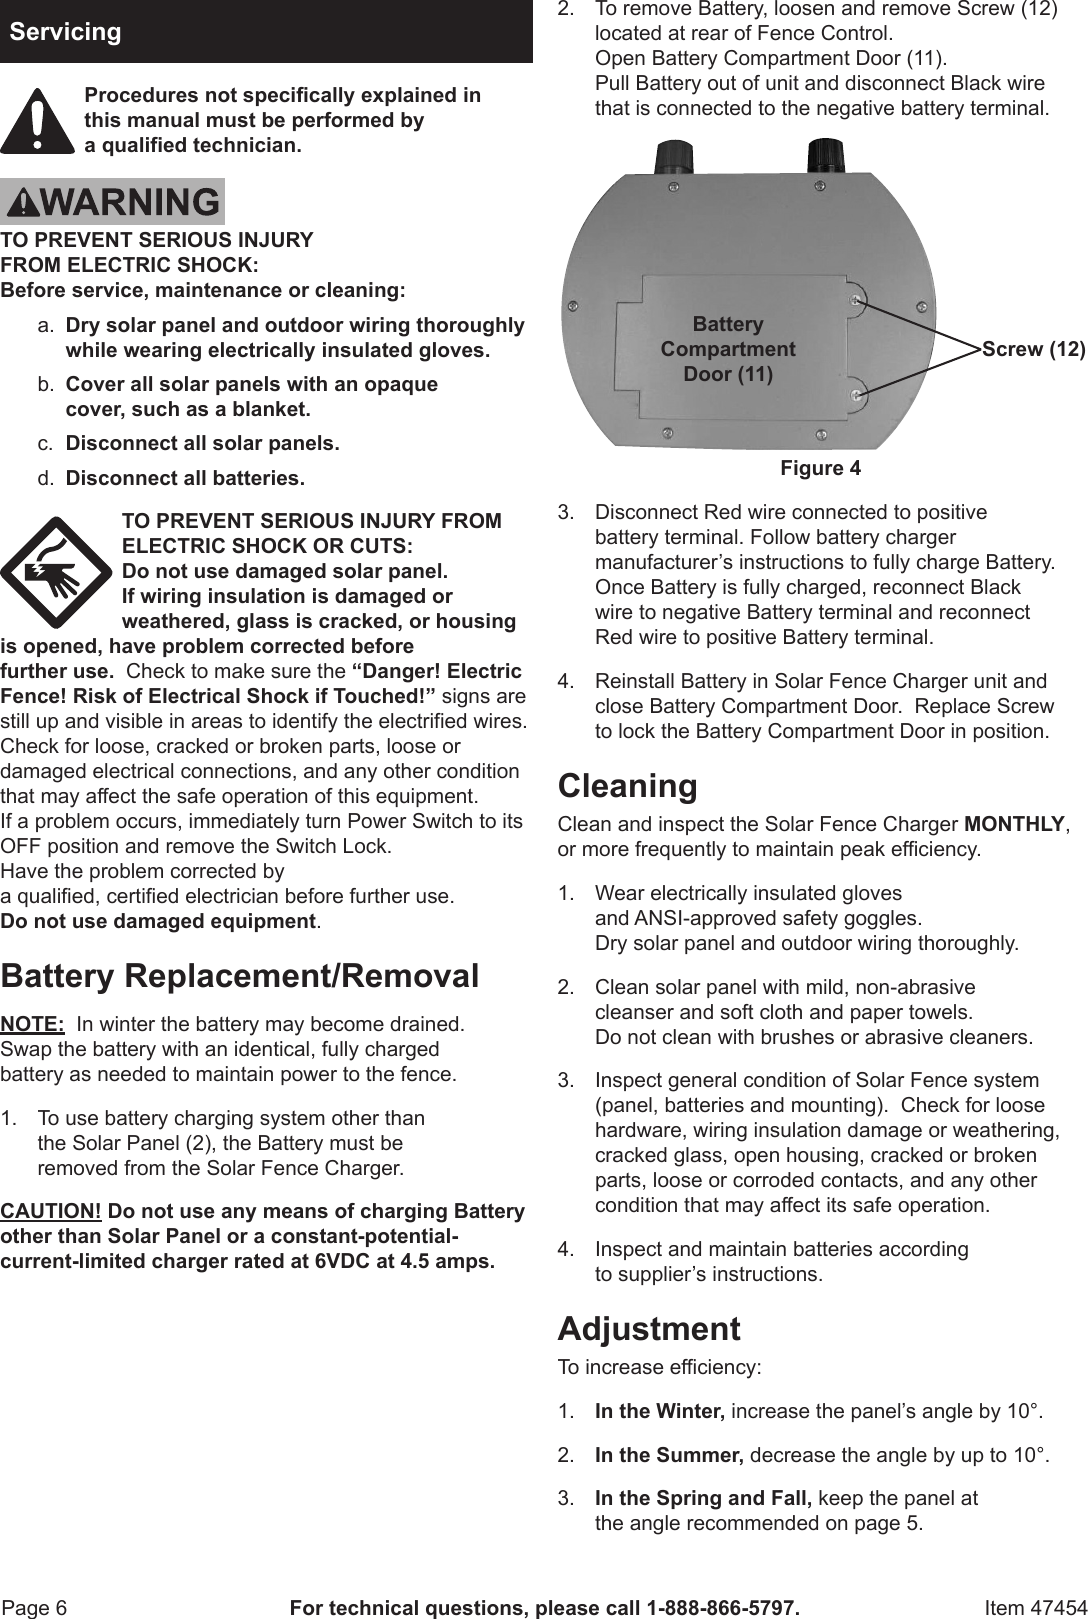 Page 6 of 8 - Harbor-Freight Harbor-Freight-Adjustable-Solar-Electric-Fence-Controller-Product-Manual-  Harbor-freight-adjustable-solar-electric-fence-controller-product-manual